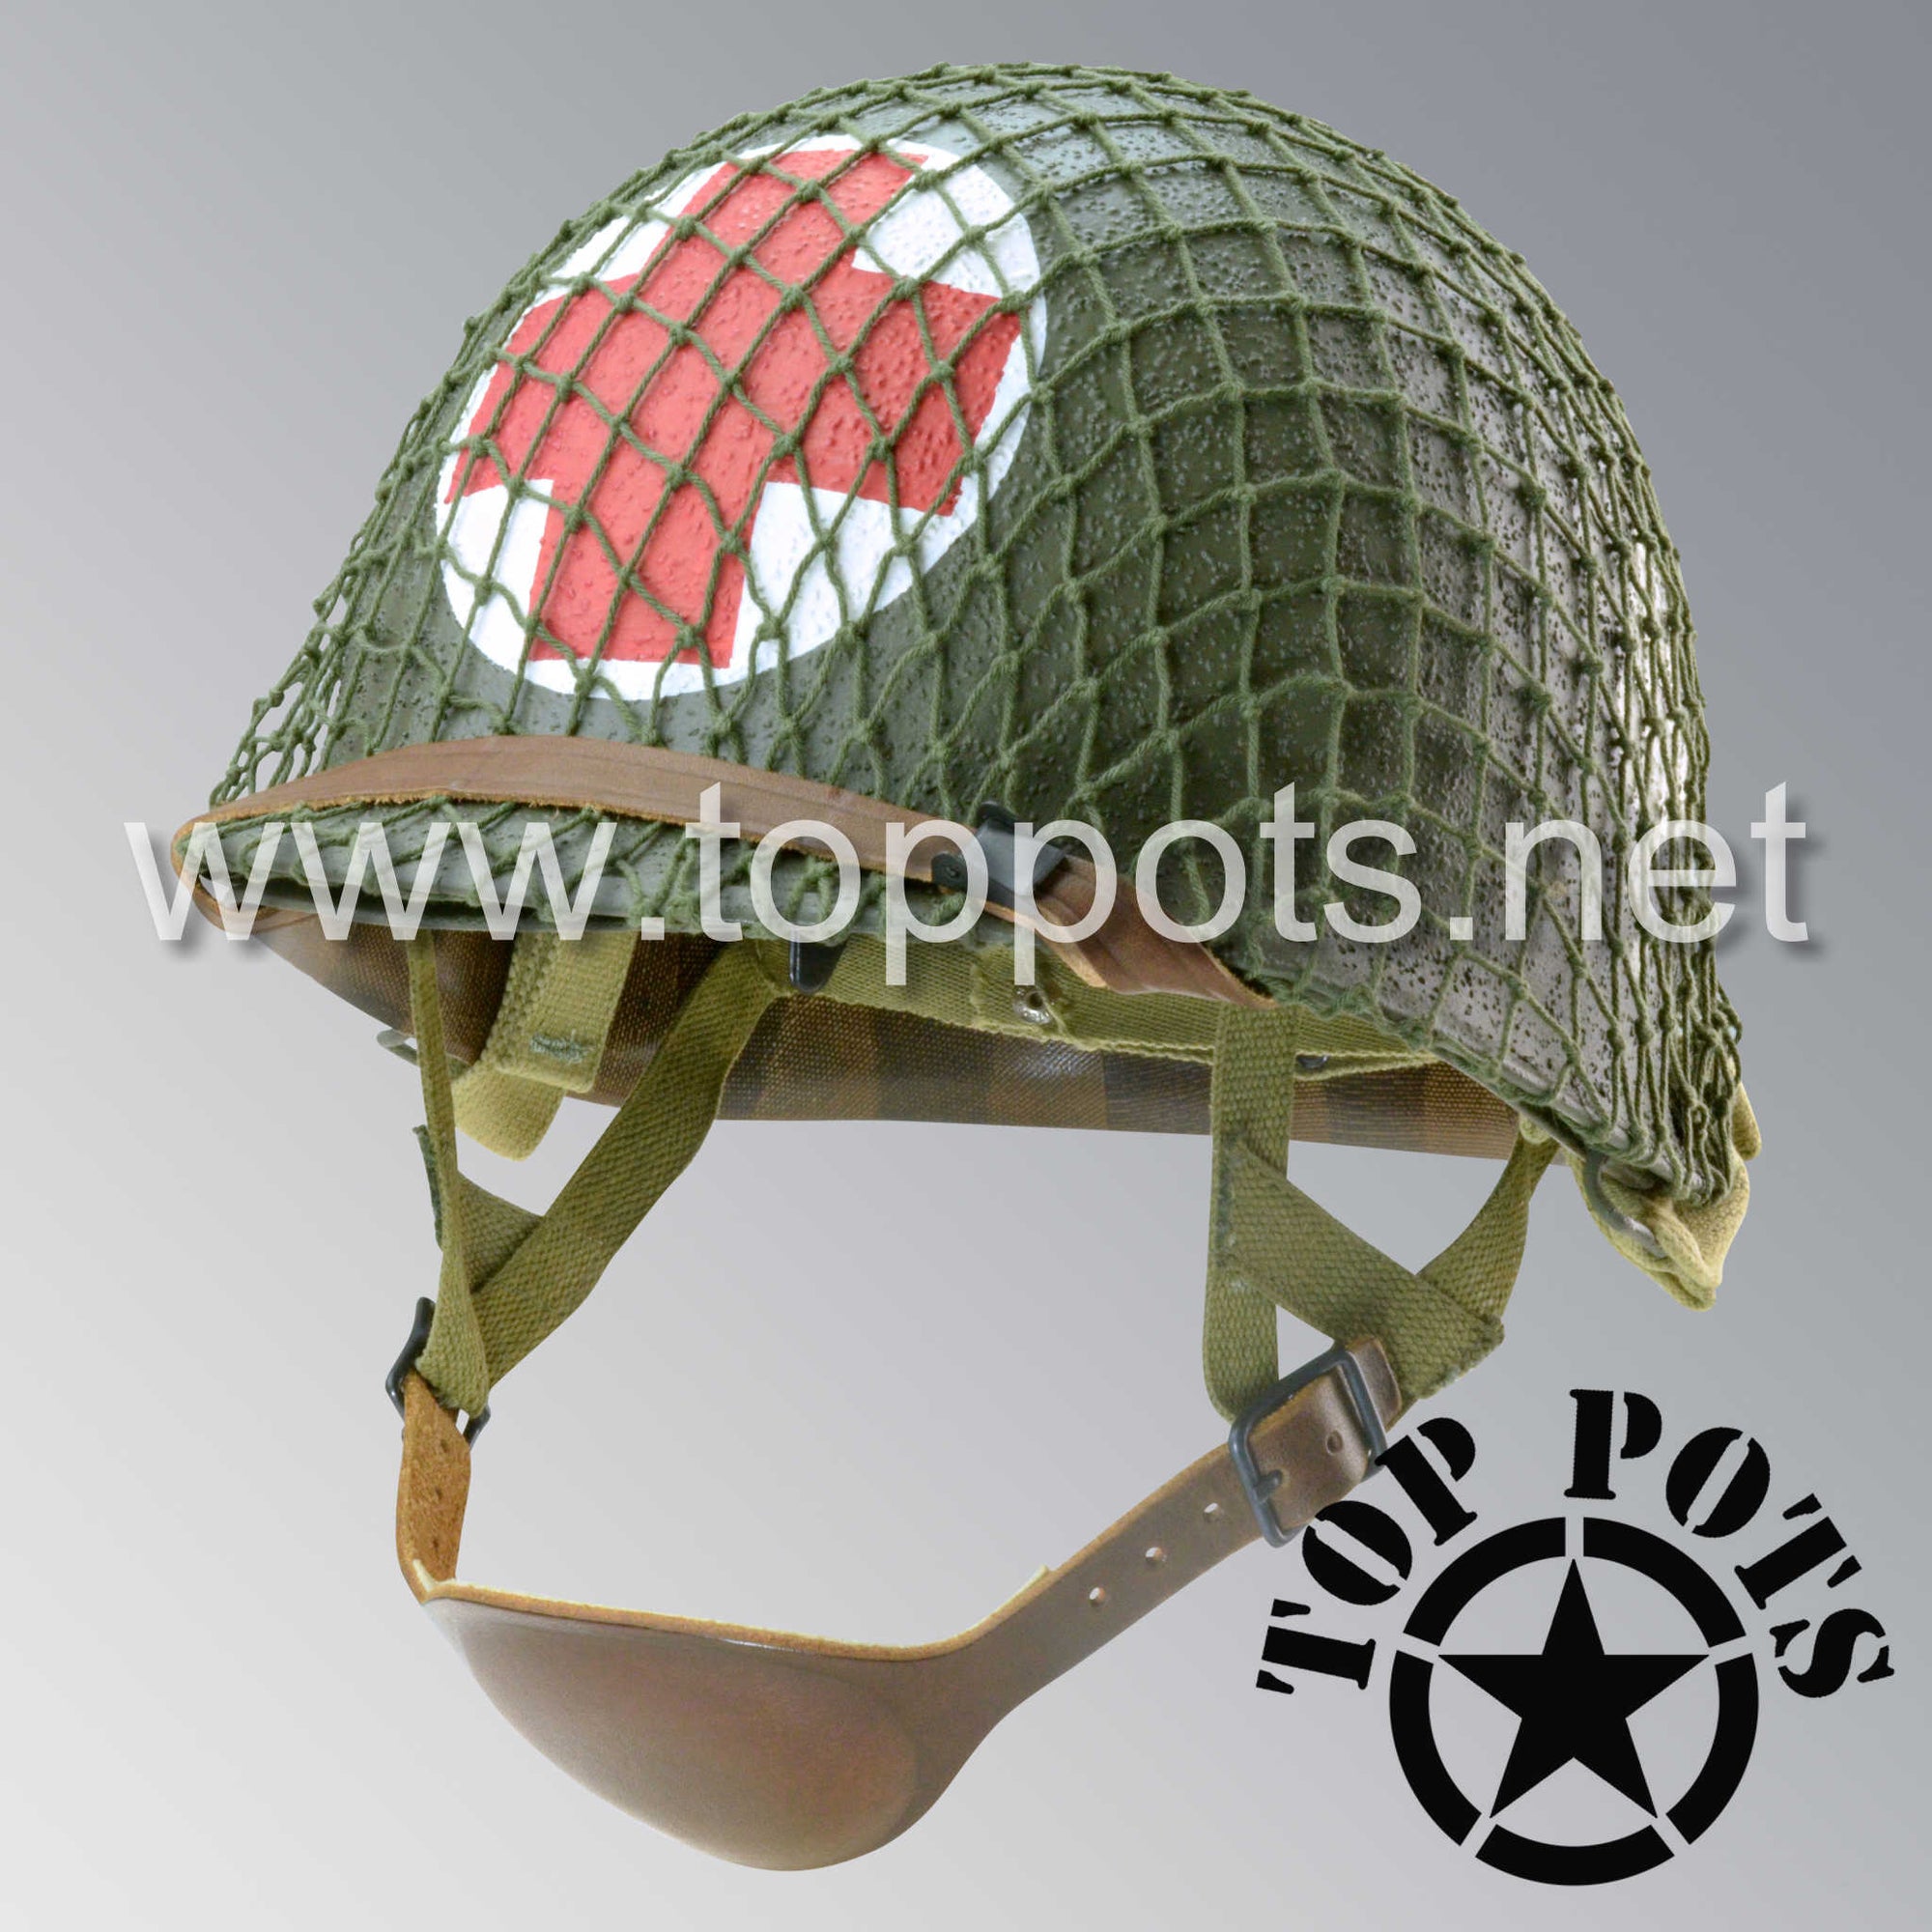 WWII US Army Restored Original M1C Paratrooper Airborne Helmet Swivel Bale Shell and Liner with 506th 2nd Battalion Medic Emblem and Net